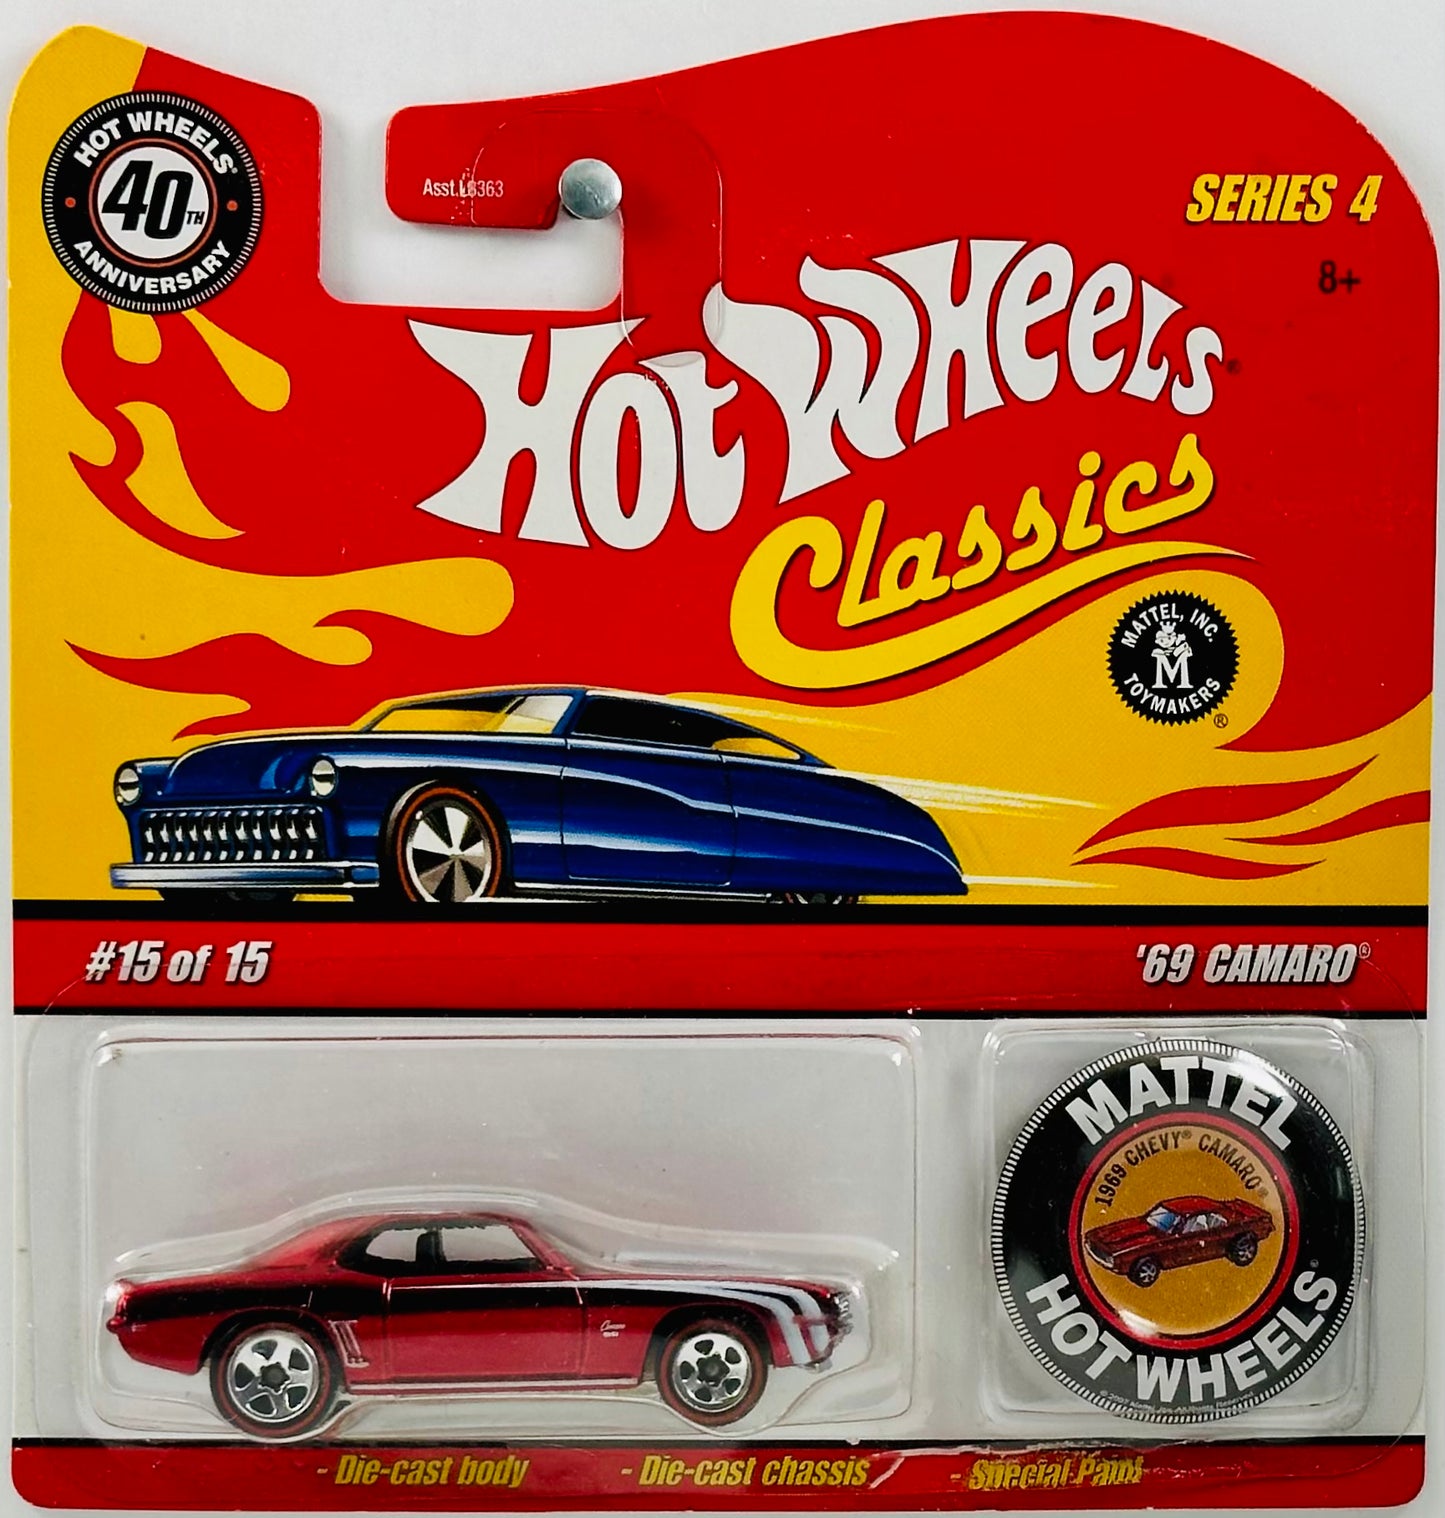 Hot Wheels 2008 - Classics Series 4 15/15 - '69 Camaro - Spectraflame Red - 5 Spoke on Red Lines - Large Blister Card